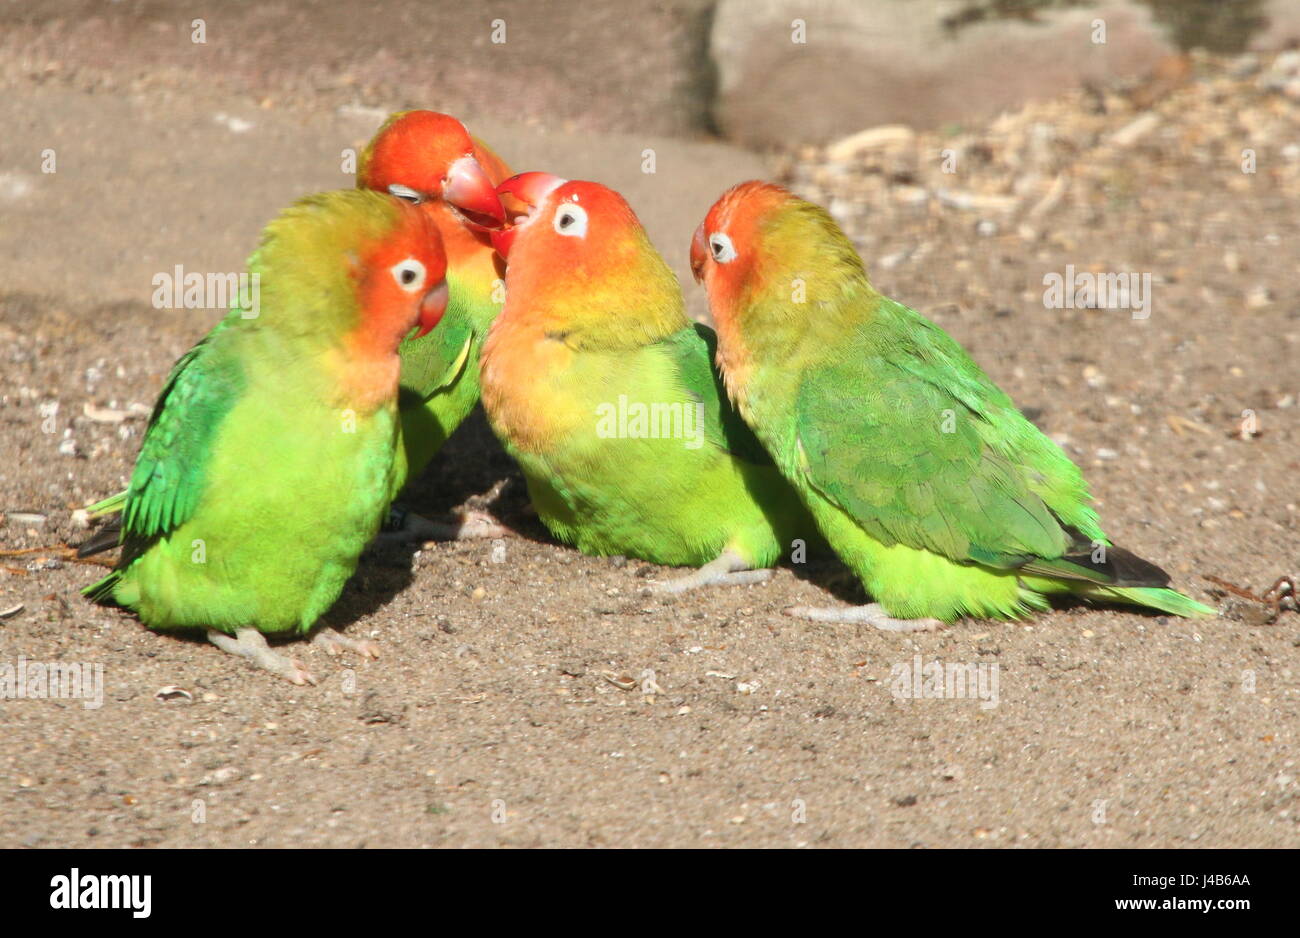 Small Parrots High Resolution Stock Photography And Images Alamy,Roundworms In Dogs Vomit